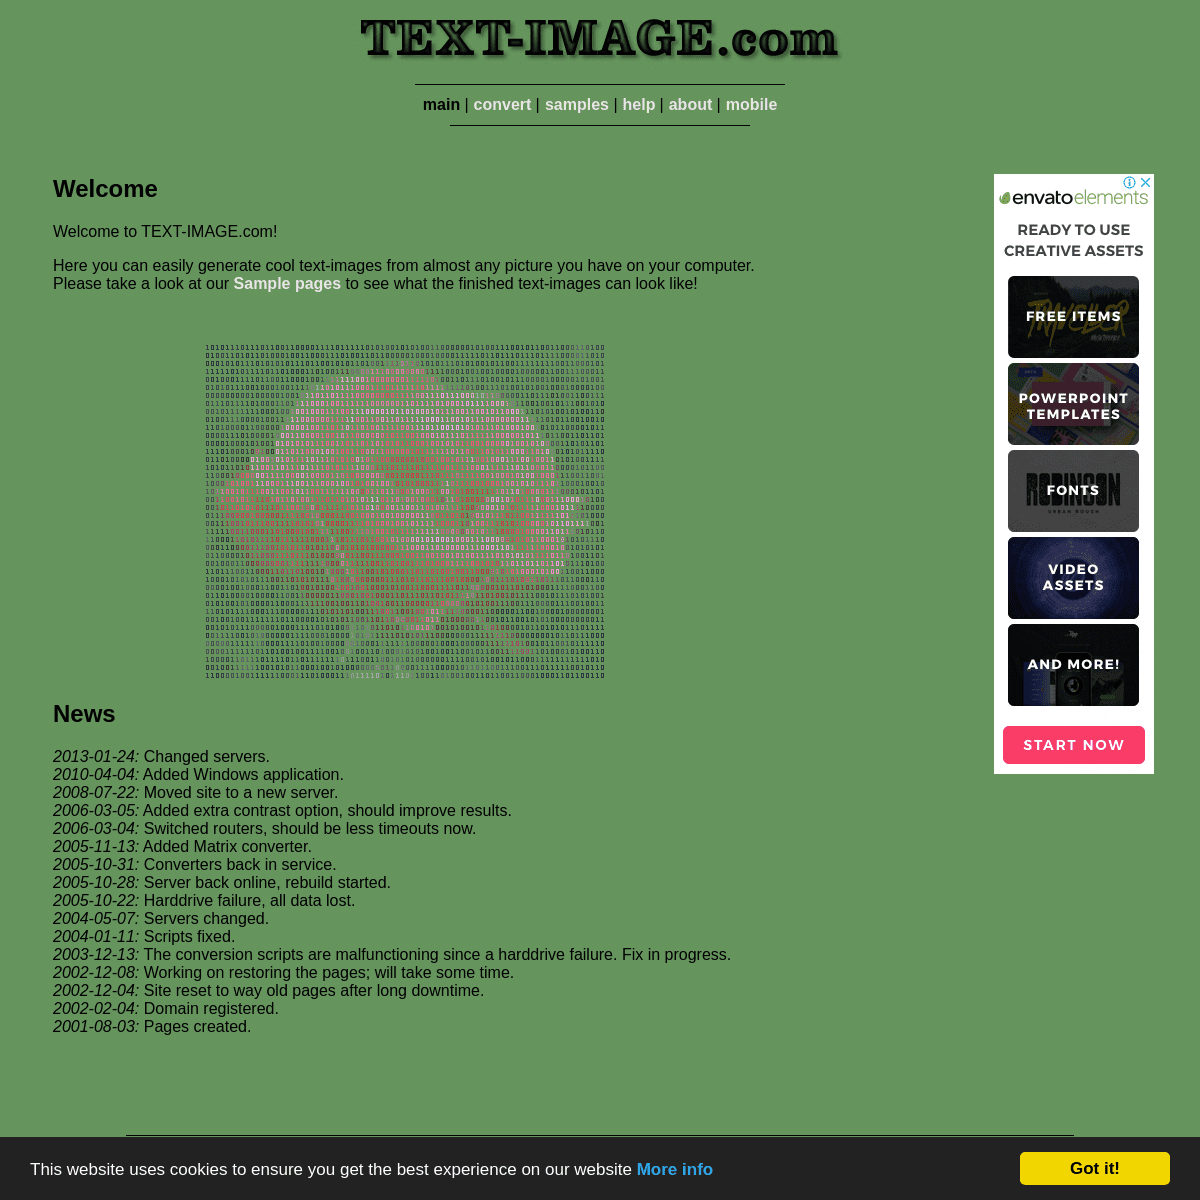 A complete backup of text-image.com